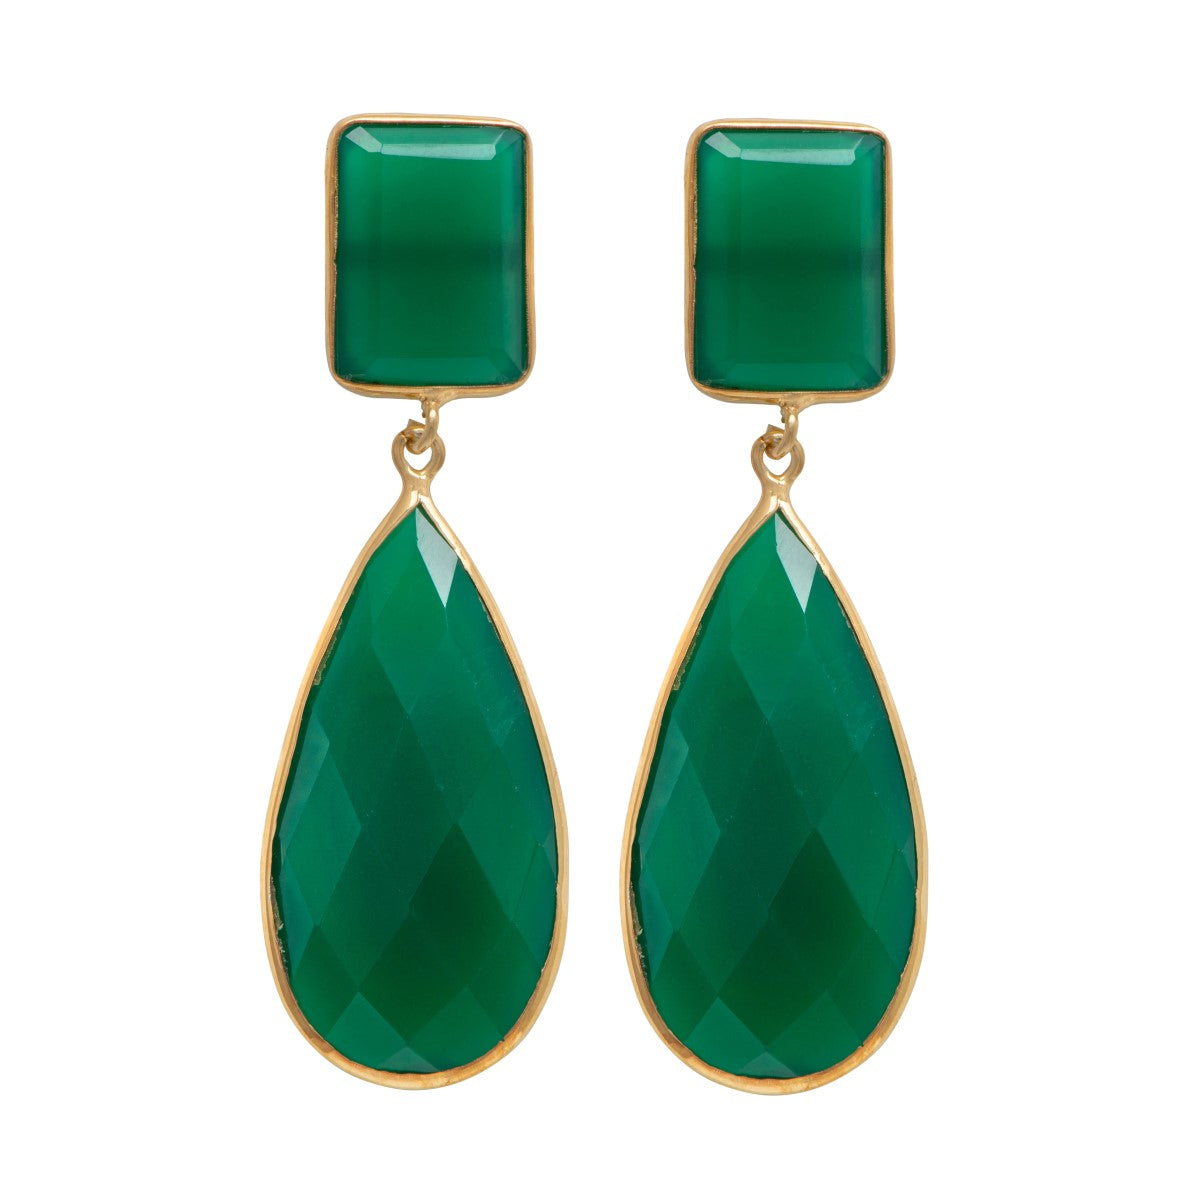 Long Statement Earrings with a Rectangle Stone and Long Pear Shaped Stone Drop - Green Onyx